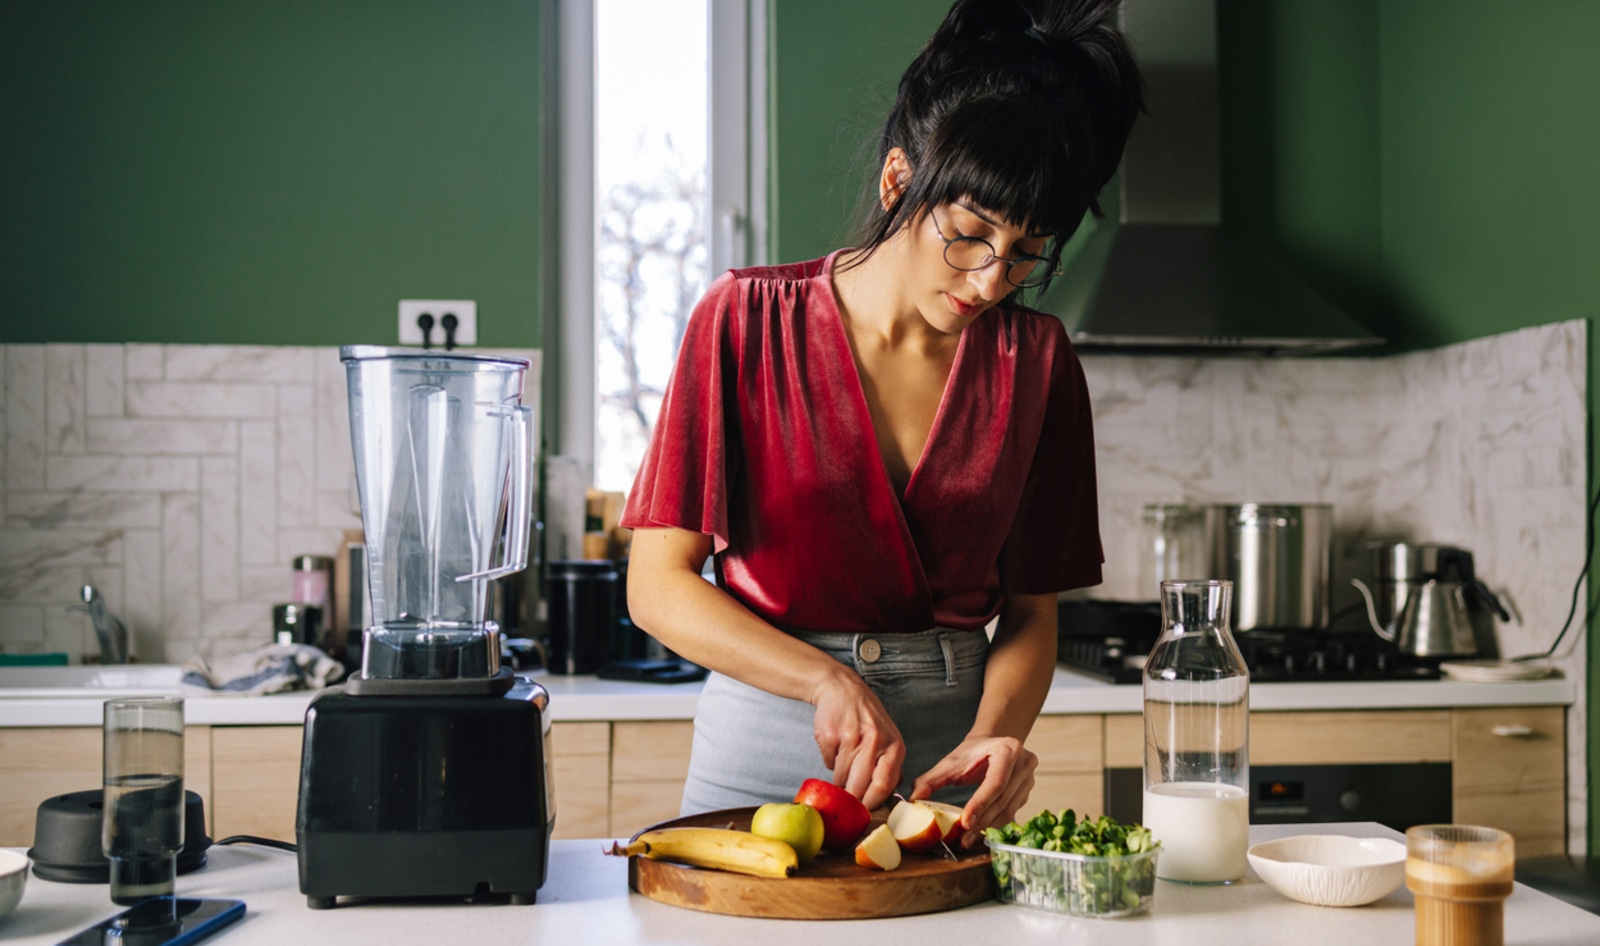 The 7 Best Food Processors To Make Your Home Cooking a Breeze